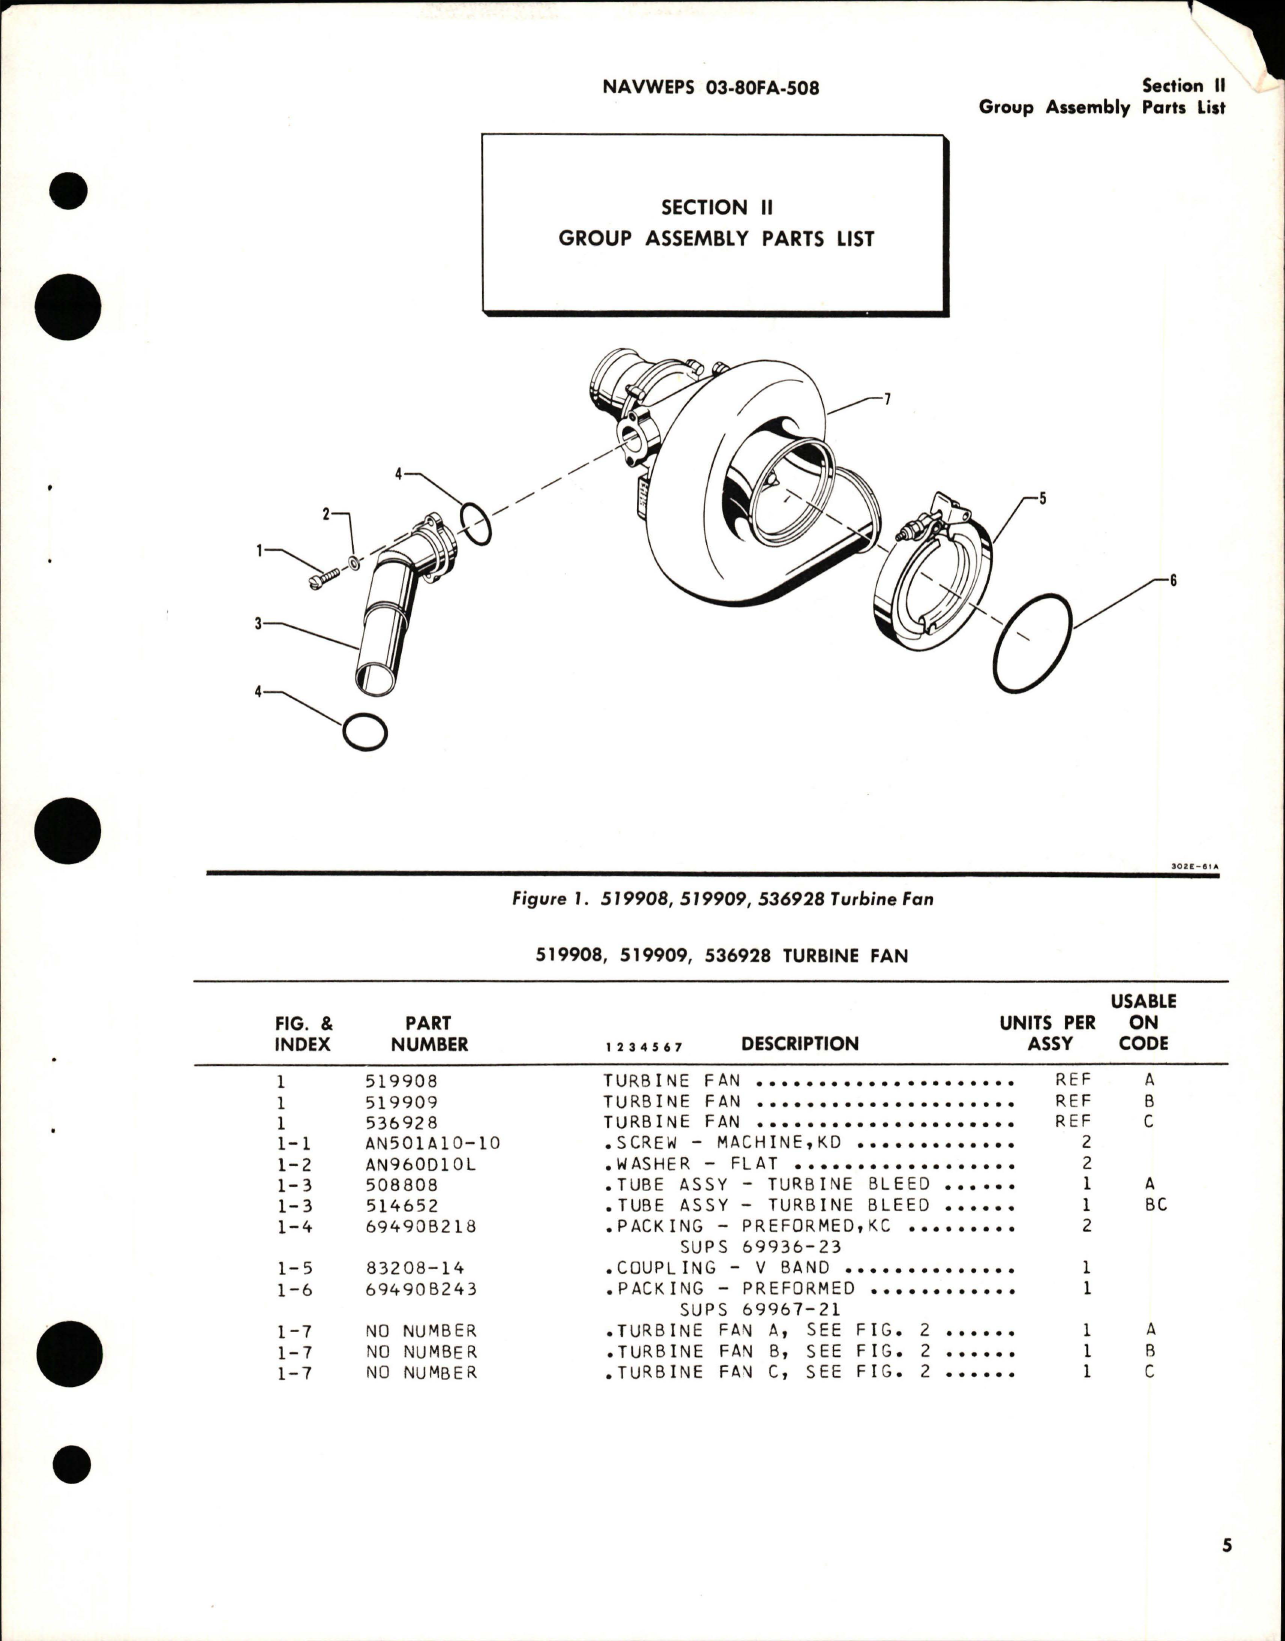 Sample page 7 from AirCorps Library document: Illustrated Parts Breakdown for Turbine Fan - Parts 519908, 519909, and 536928 